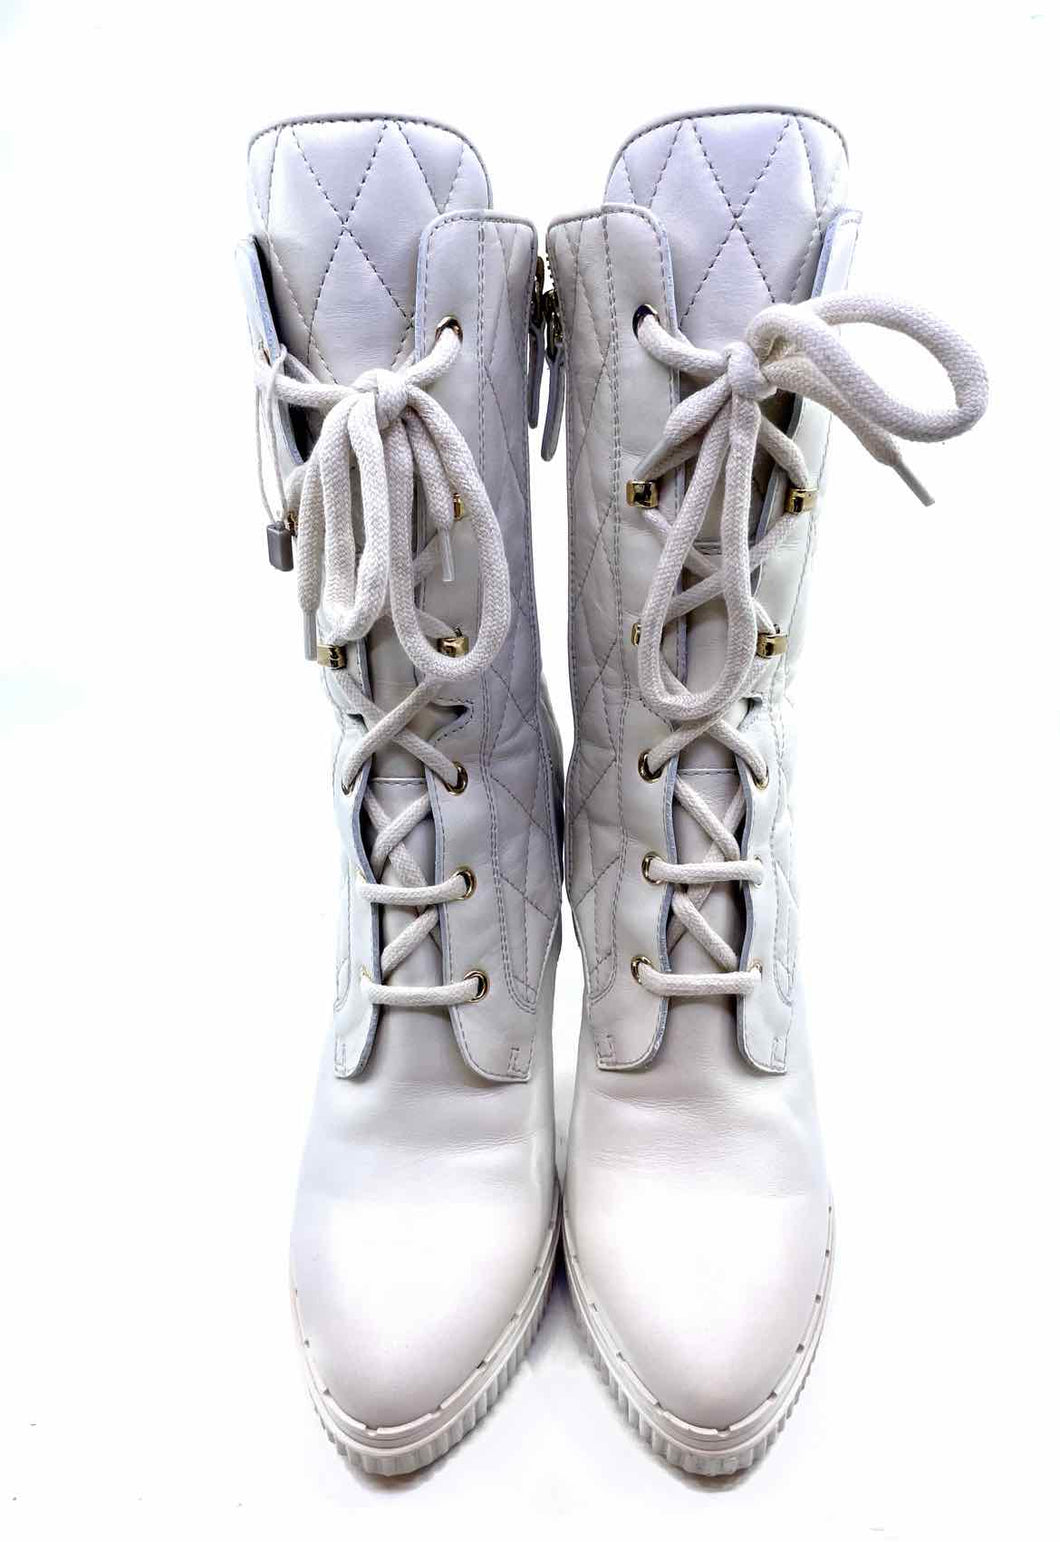 TOD'S Size 6 White Leather Tall Boot